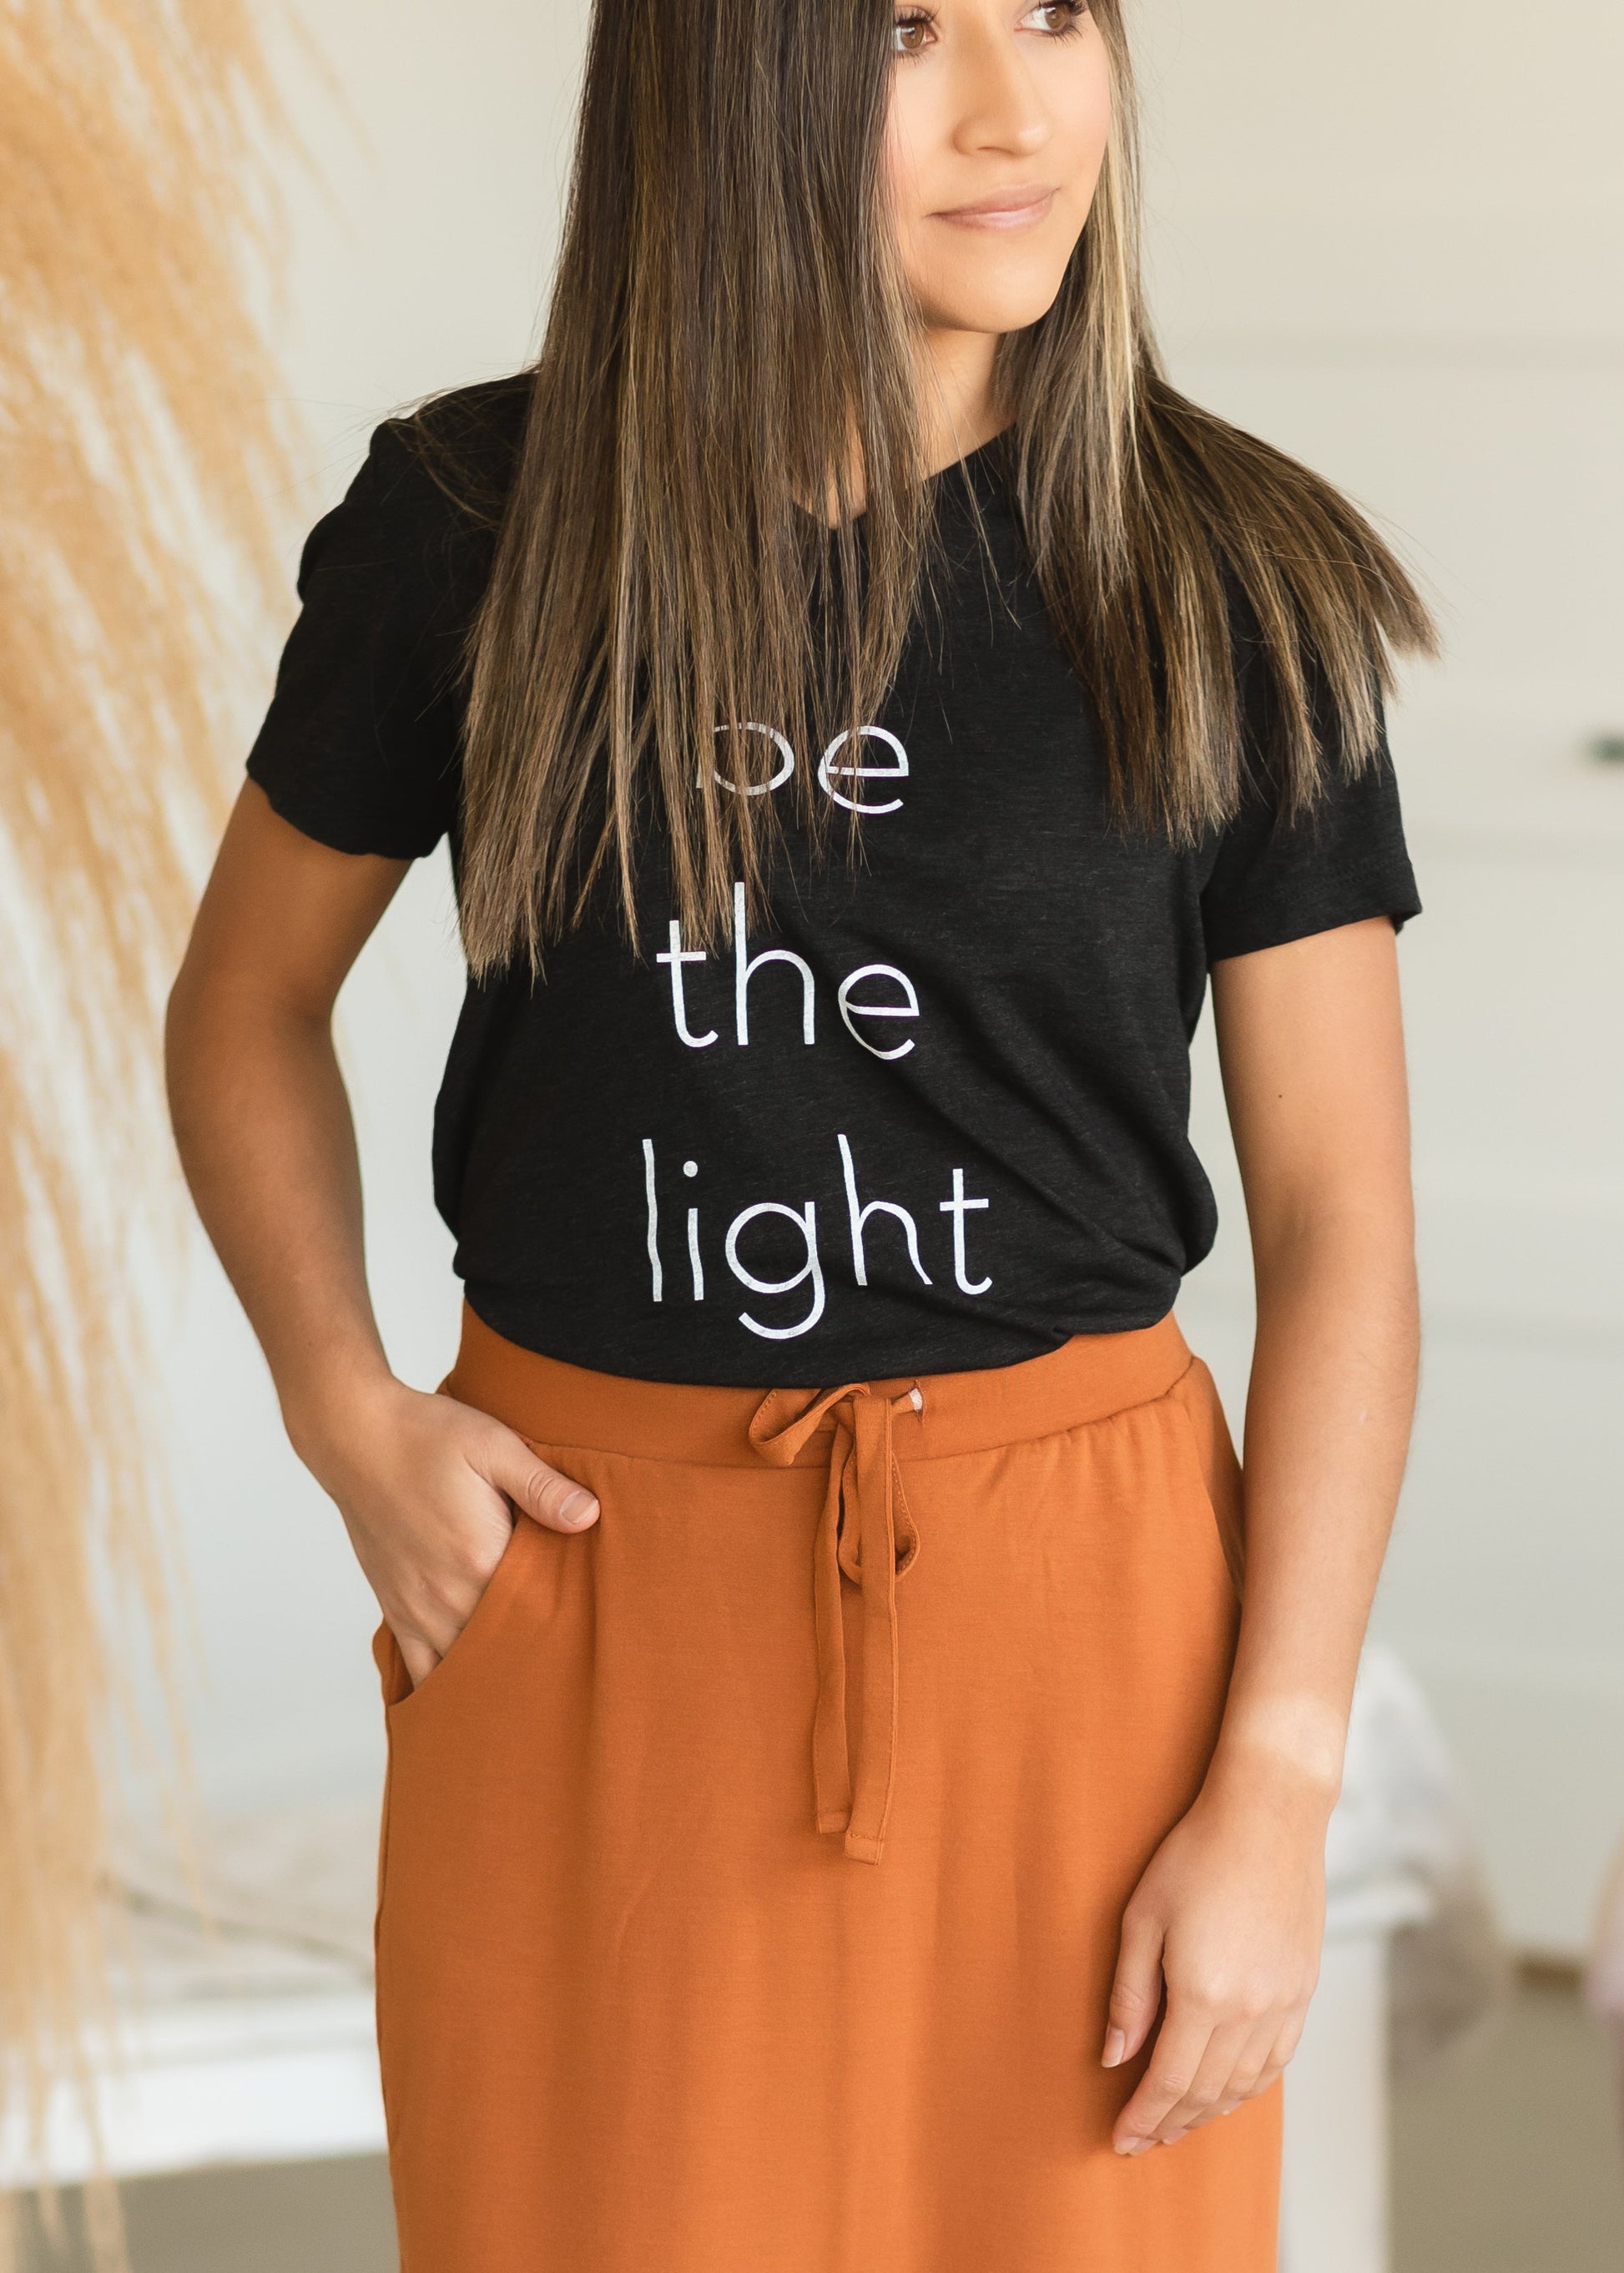 Be The Light Graphic Tee - FINAL SALE Shirt